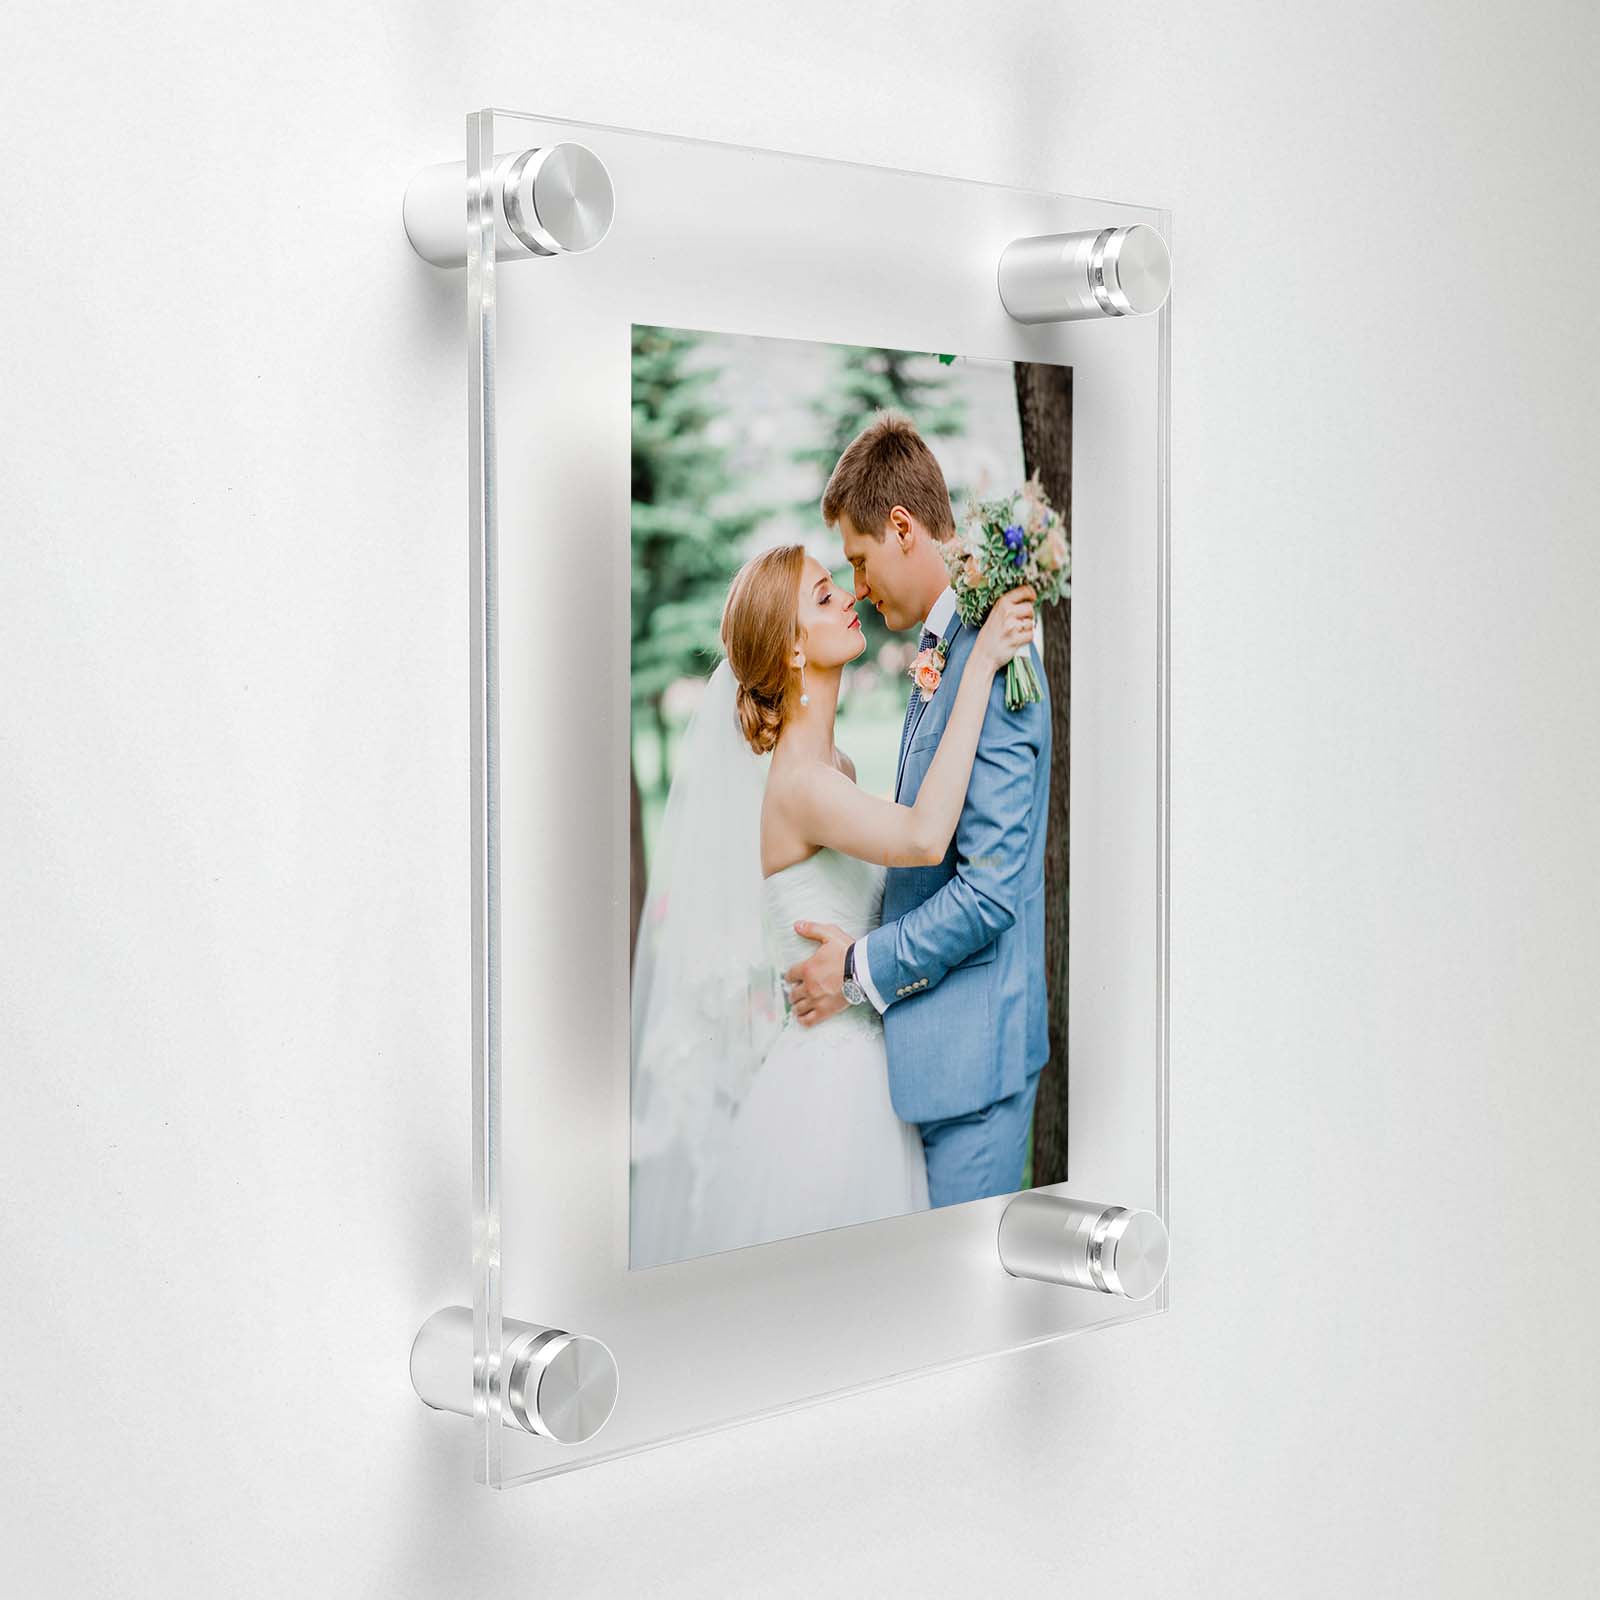 (2) 24'' x 36'' Clear Acrylics , Pre-Drilled With Polished Edges (Thick 3/16'' each), Wall Frame with (6) 1'' x 1'' Silver Anodized Aluminum Standoffs includes Screws and Anchors